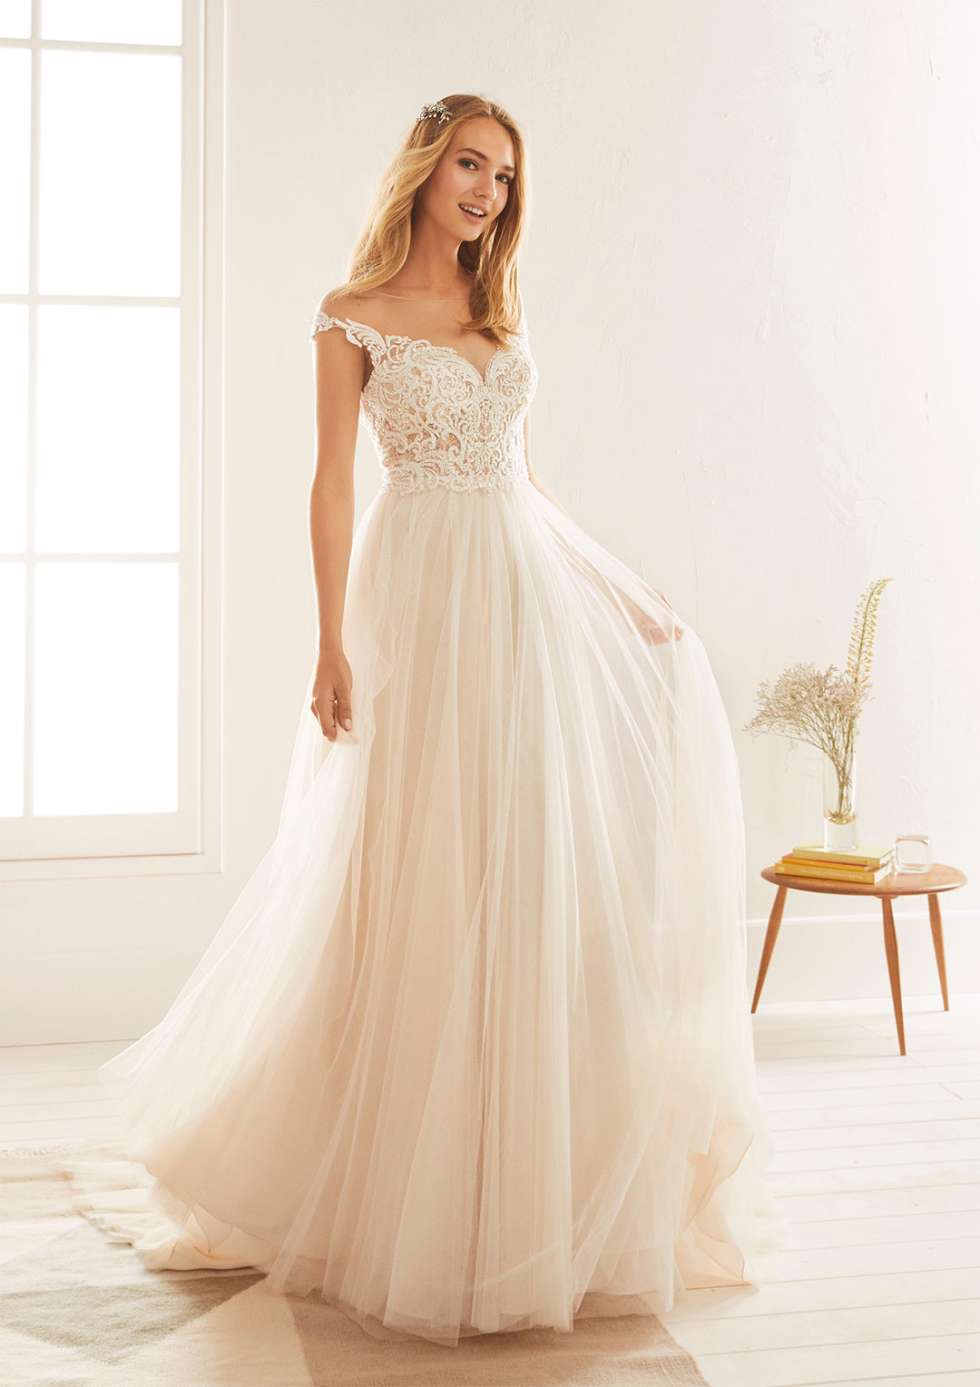 Cheap Wedding Dresses And Bridesmaid Dresses | there are many cheap wedding  dresses and bridesmaid dresses for the brides and bridesmaid. There are  also have many mother dresses.